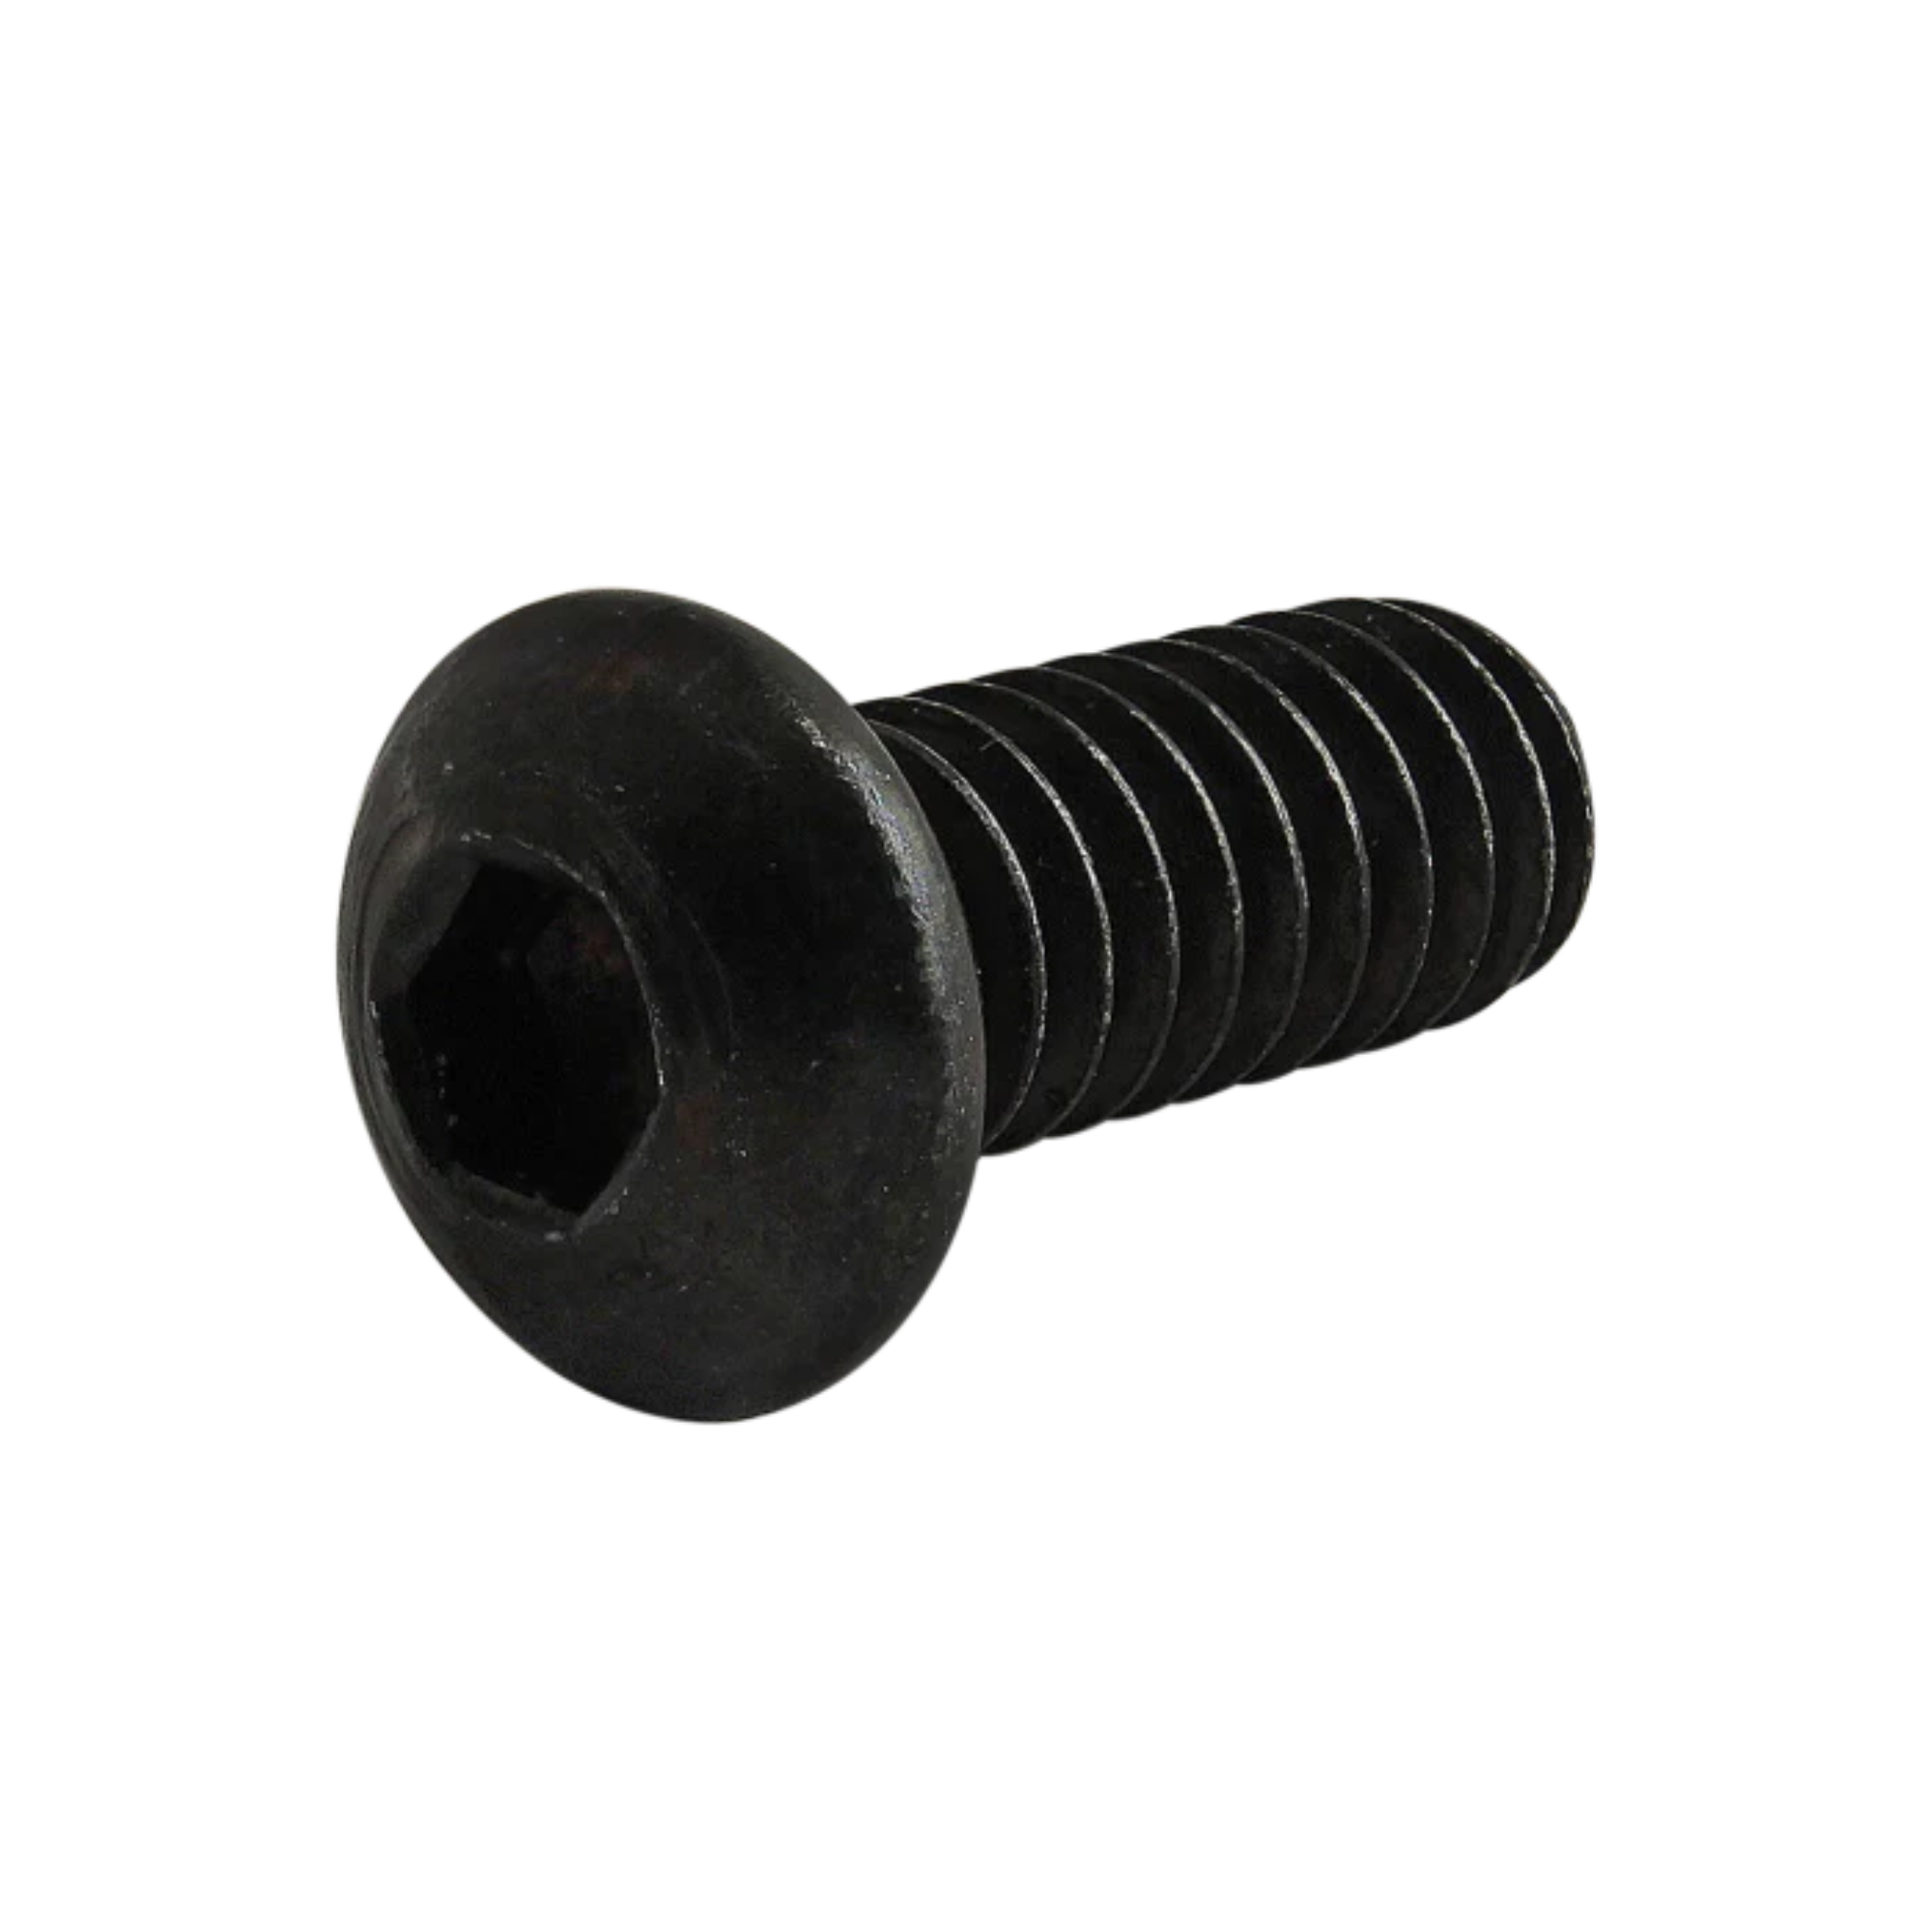 side view of a black metal screw with a hex head on the left and threading on the right